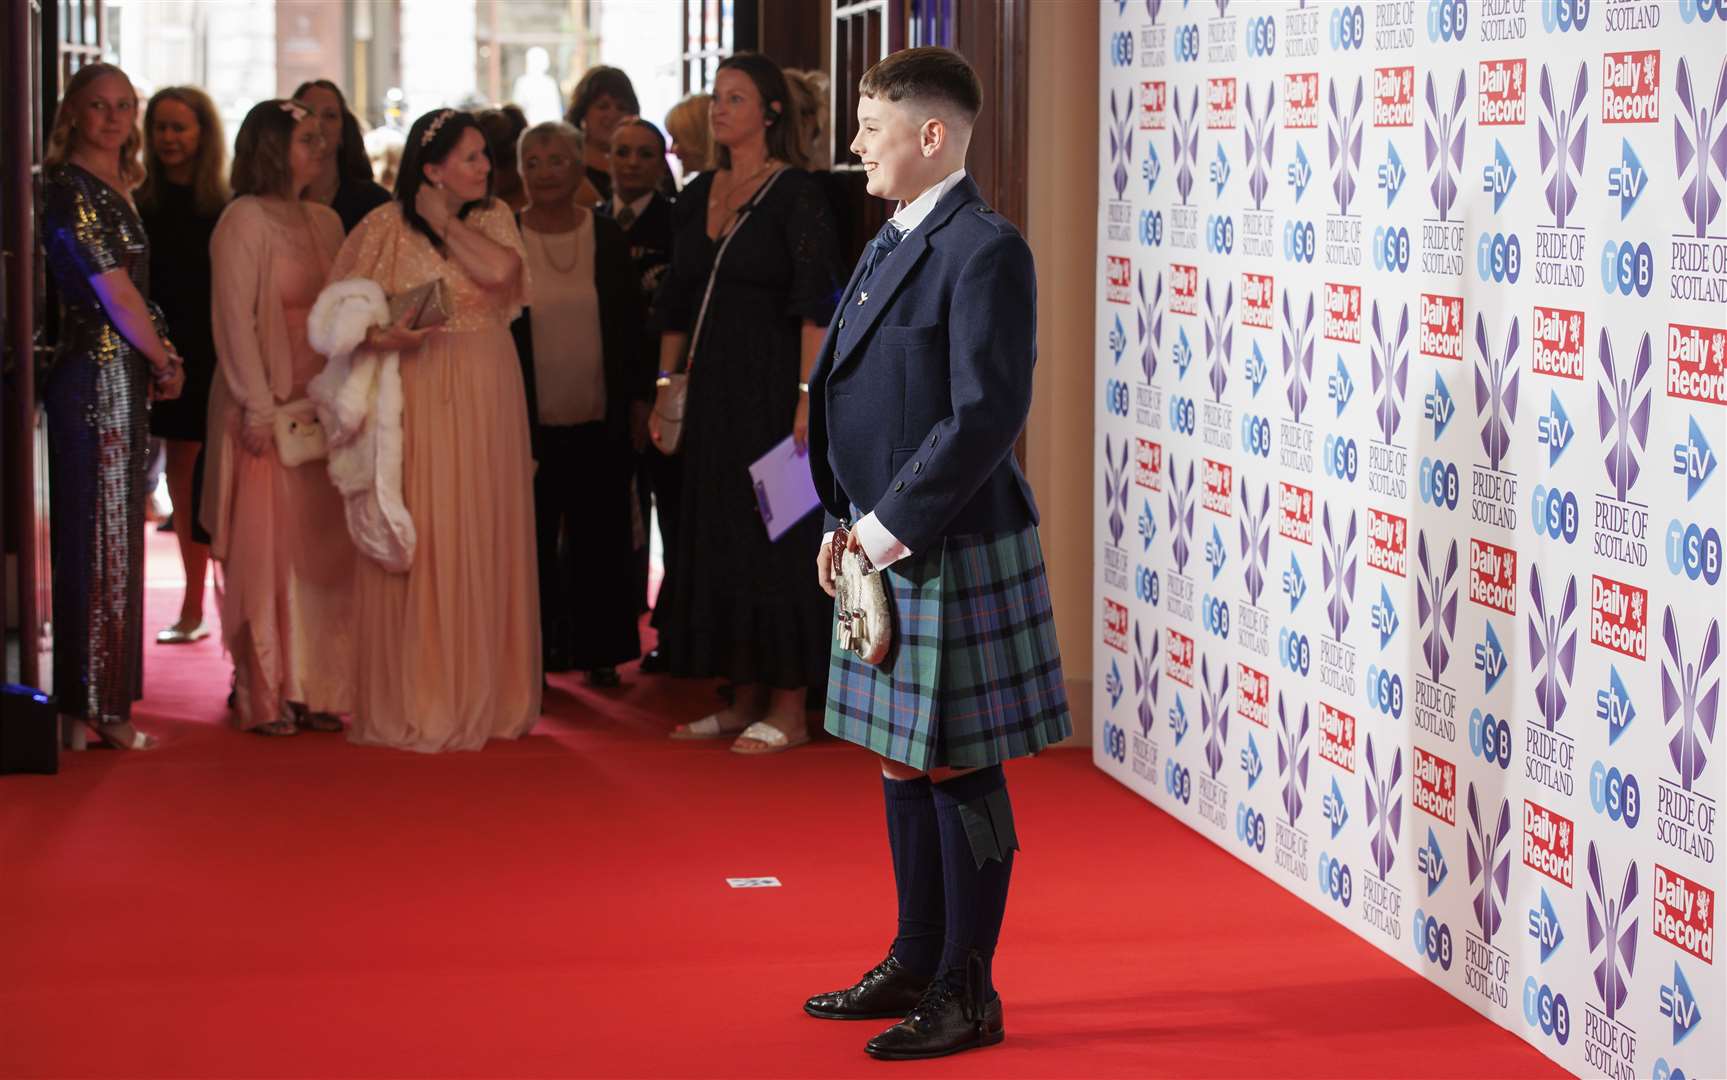 Keiran Reid (12) was honoured at the Pride of Scotland awards ceremony for his efforts in raising thousands of pounds for the RNLI.